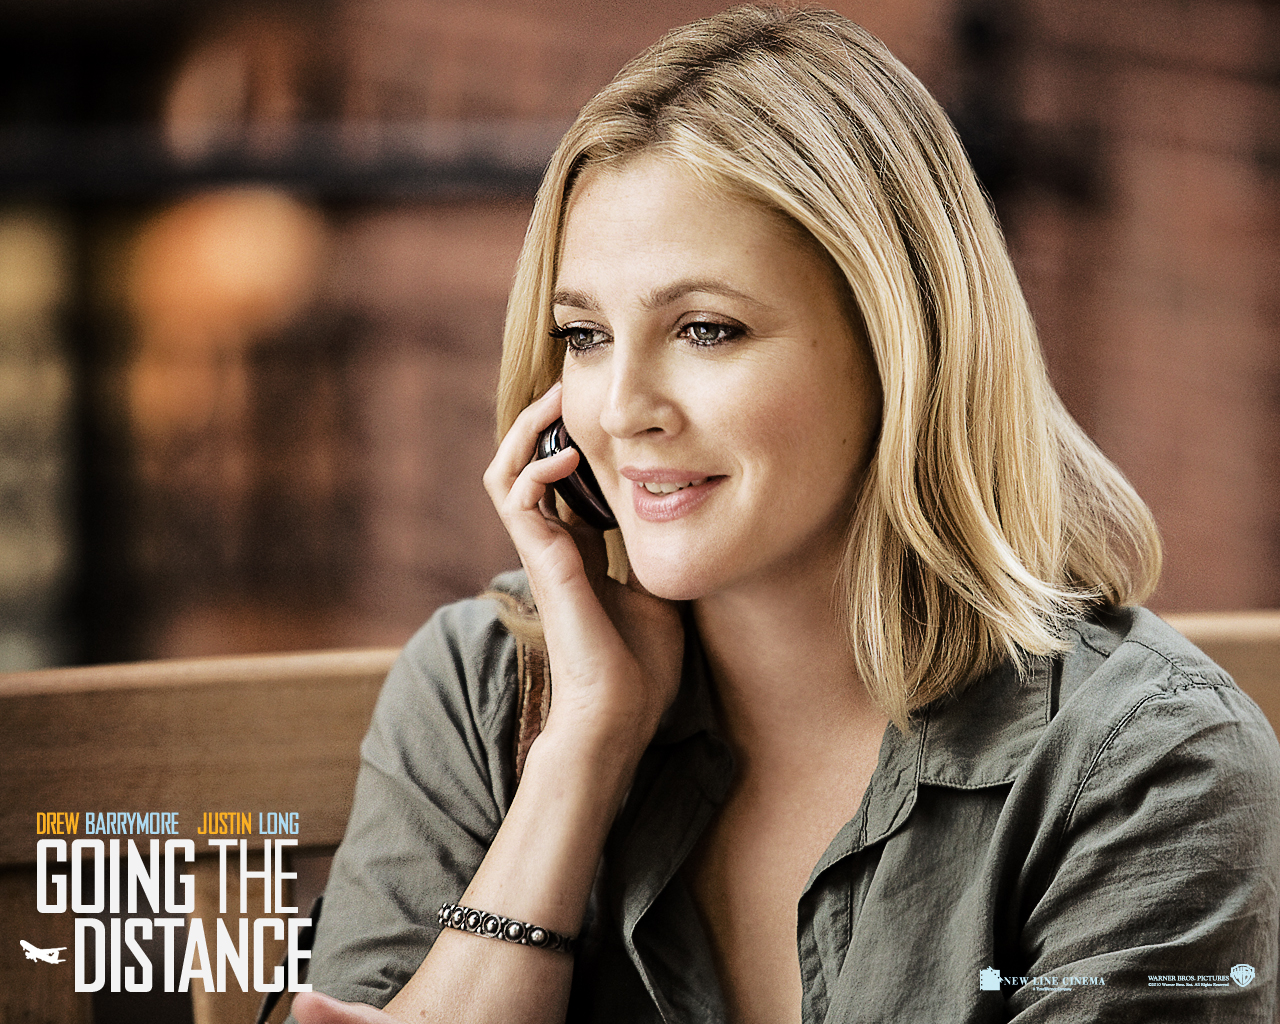 drew barrymore in going the distance wallpaper